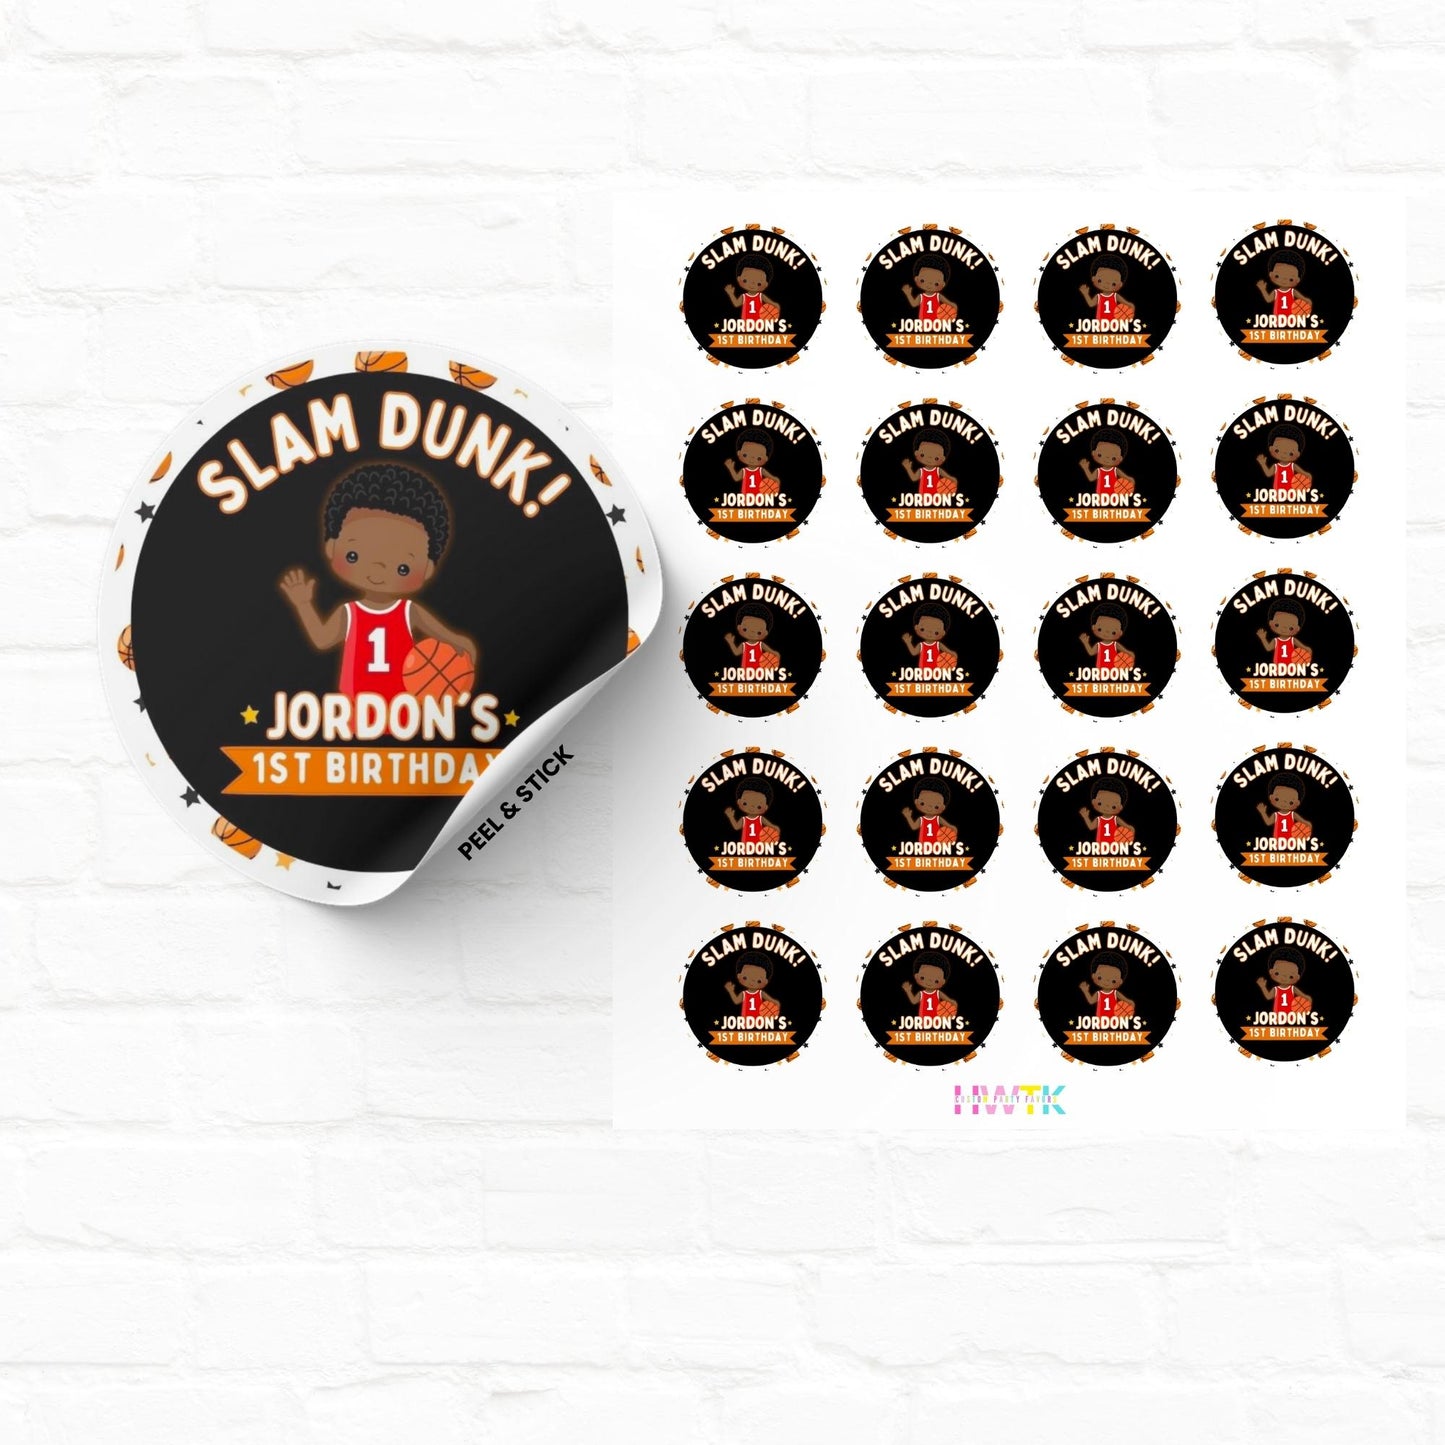 Basketball Party Slam Dunk 2" Personalized Round Stickers